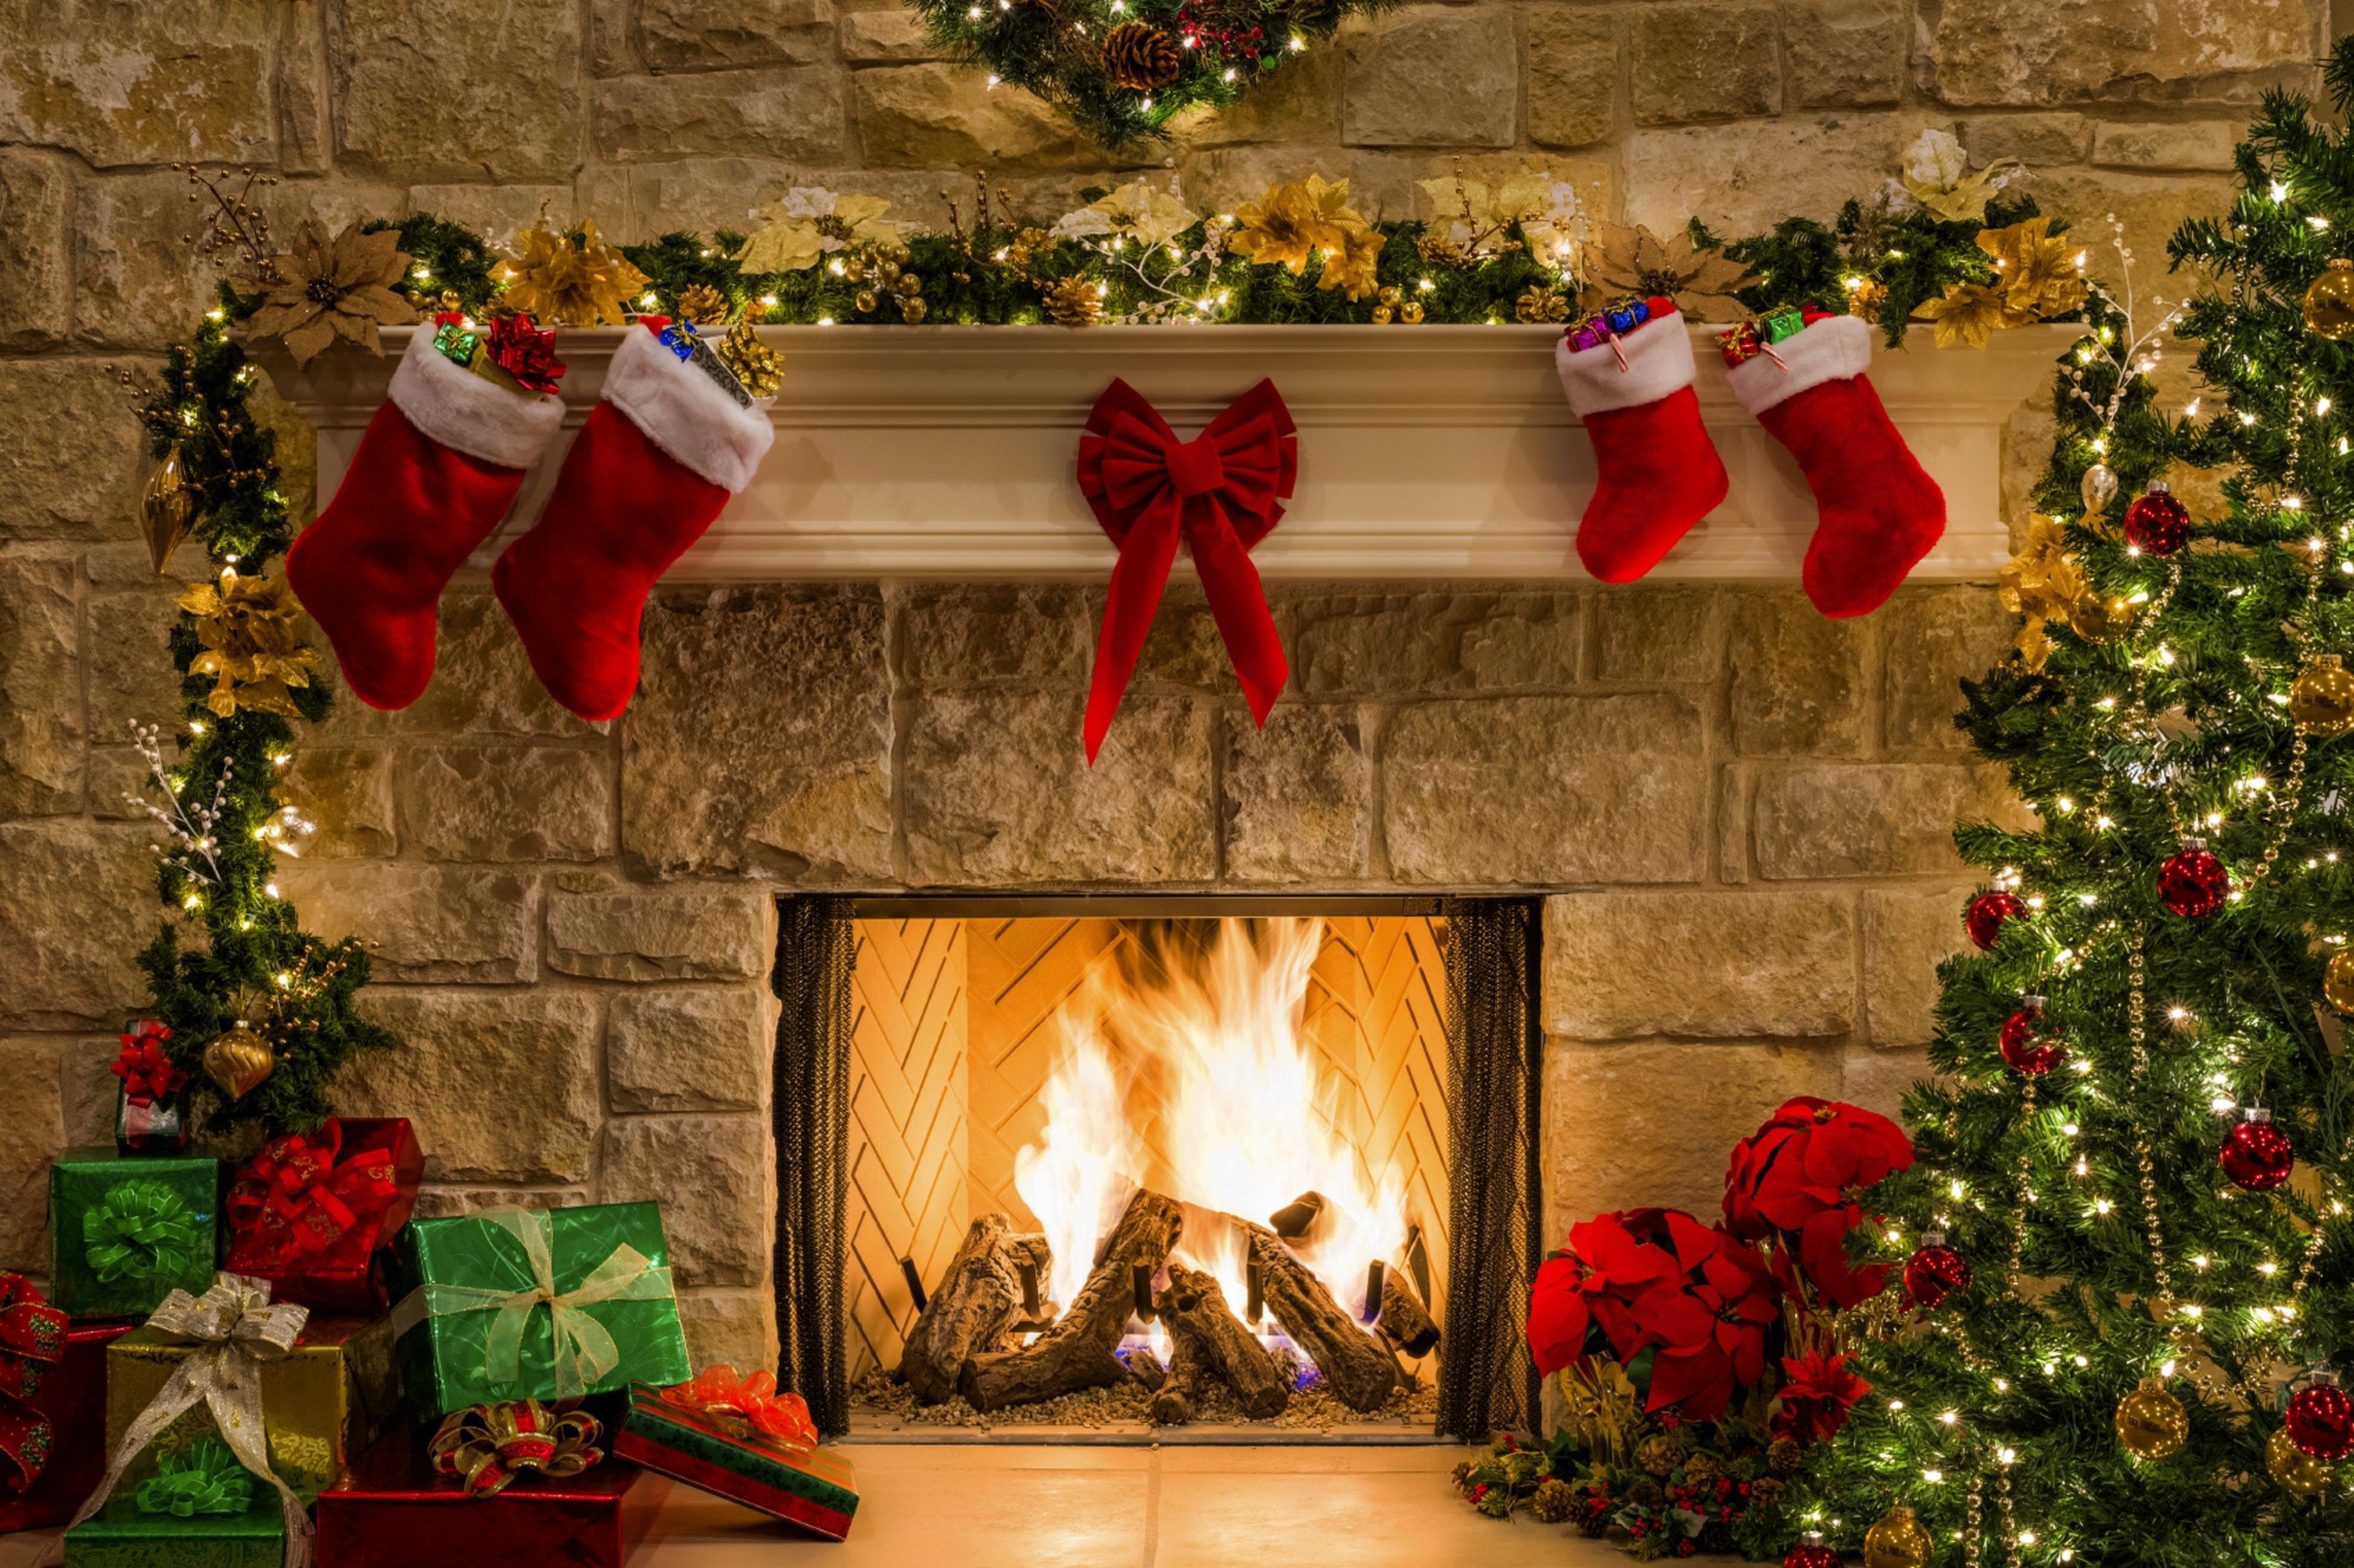 Fireplace & Knit Christmas Stockings, Picture, Photo